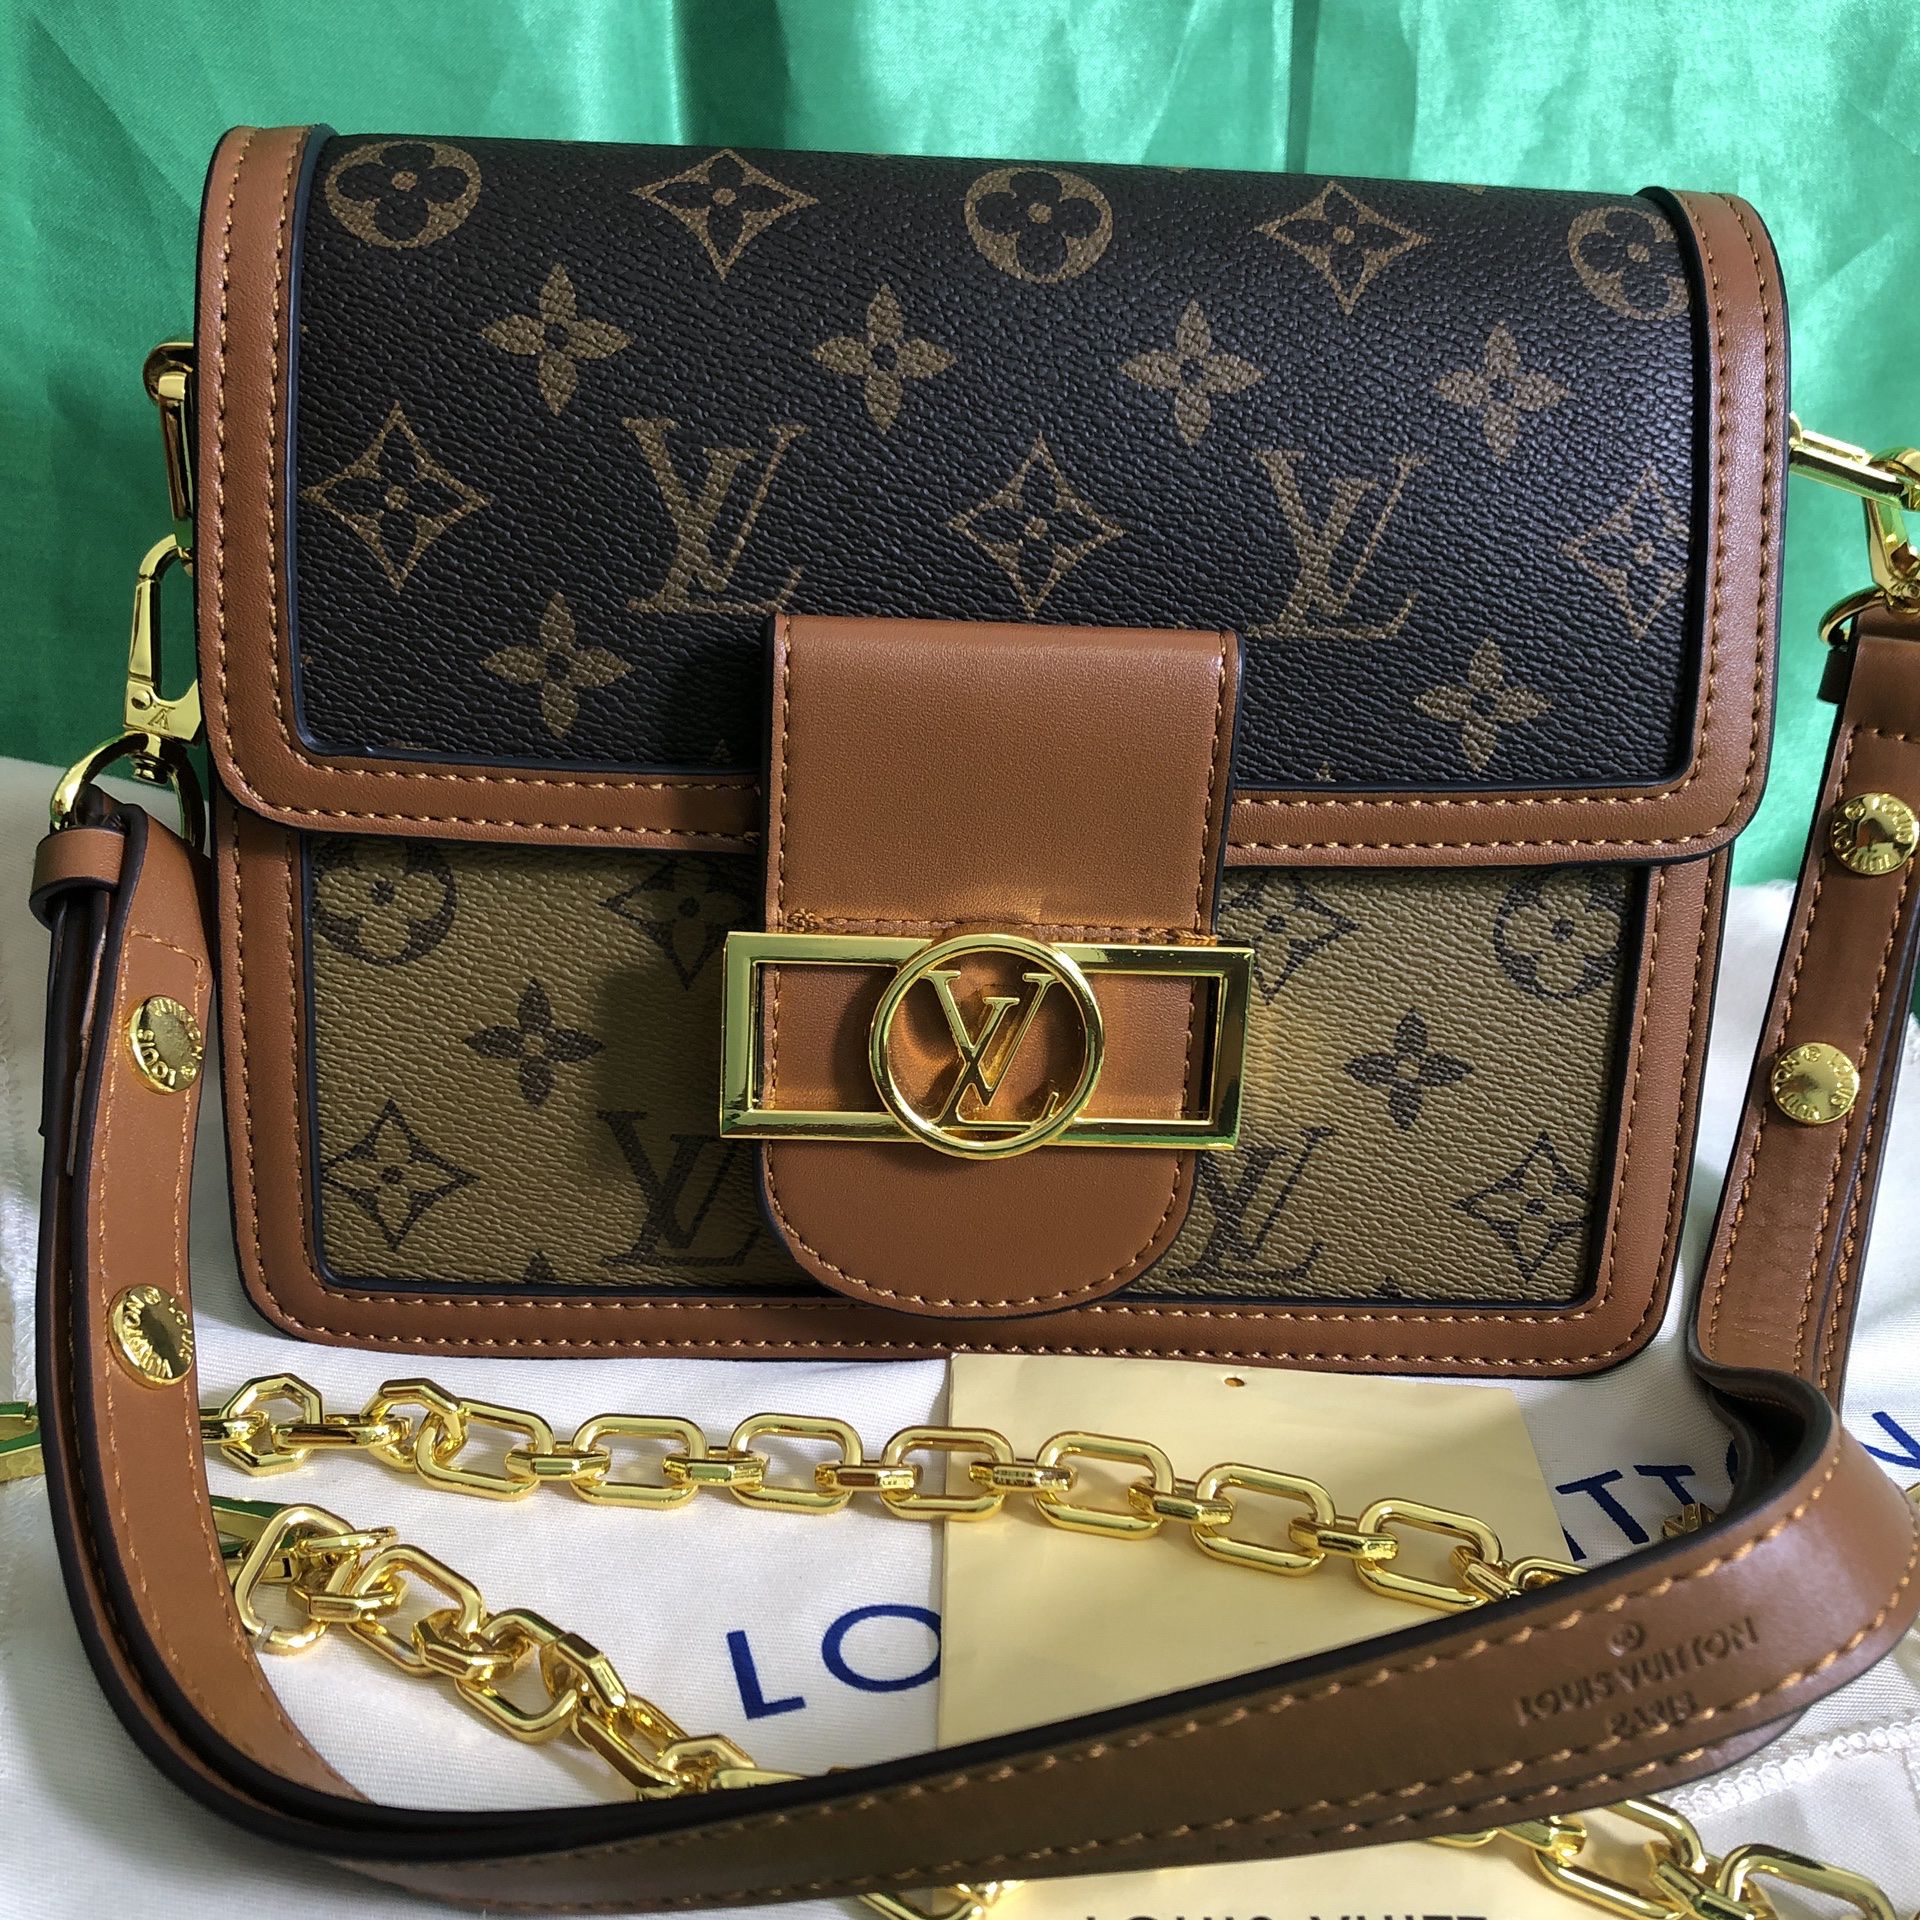 Authentic Louis Vuitton classic color crossbody bag, leather shoulder bag,  envelope bag. Sold at low price for Sale in Jackson, MI - OfferUp